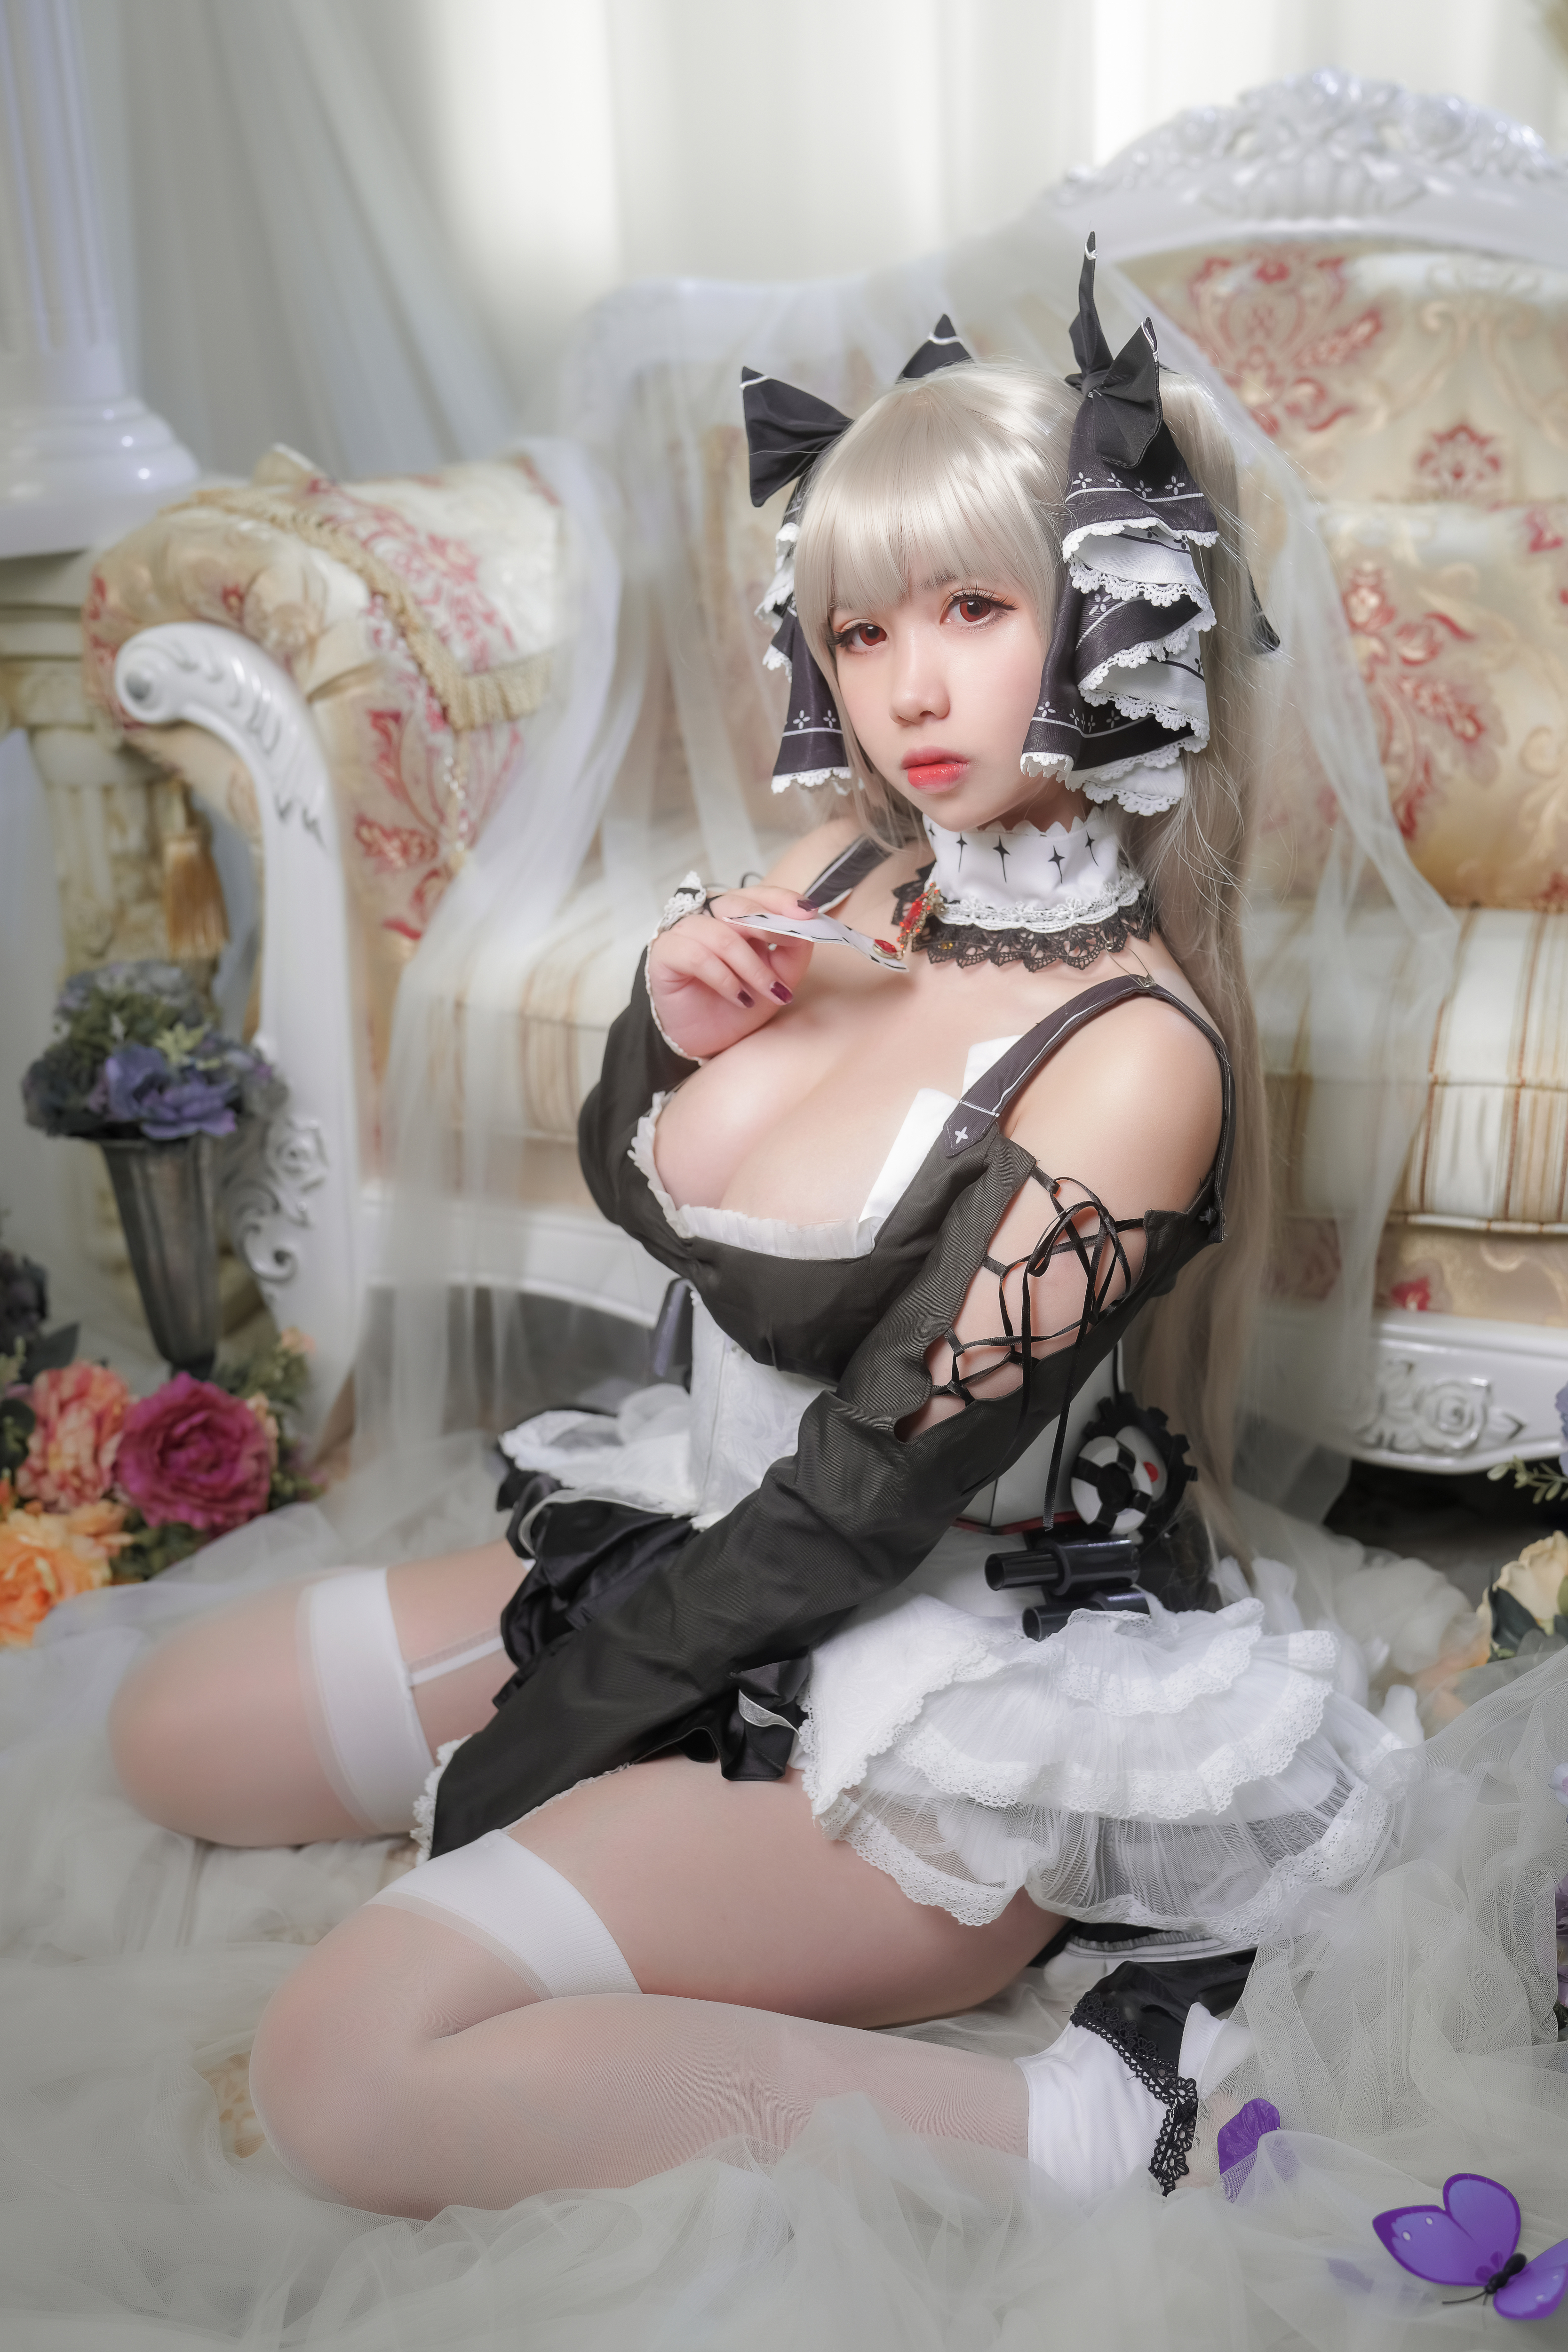 People 3333x5000 Meroko (Model) women model Asian cosplay Formidable (Azur Lane) Azur Lane video games maid maid outfit women indoors lingerie stockings